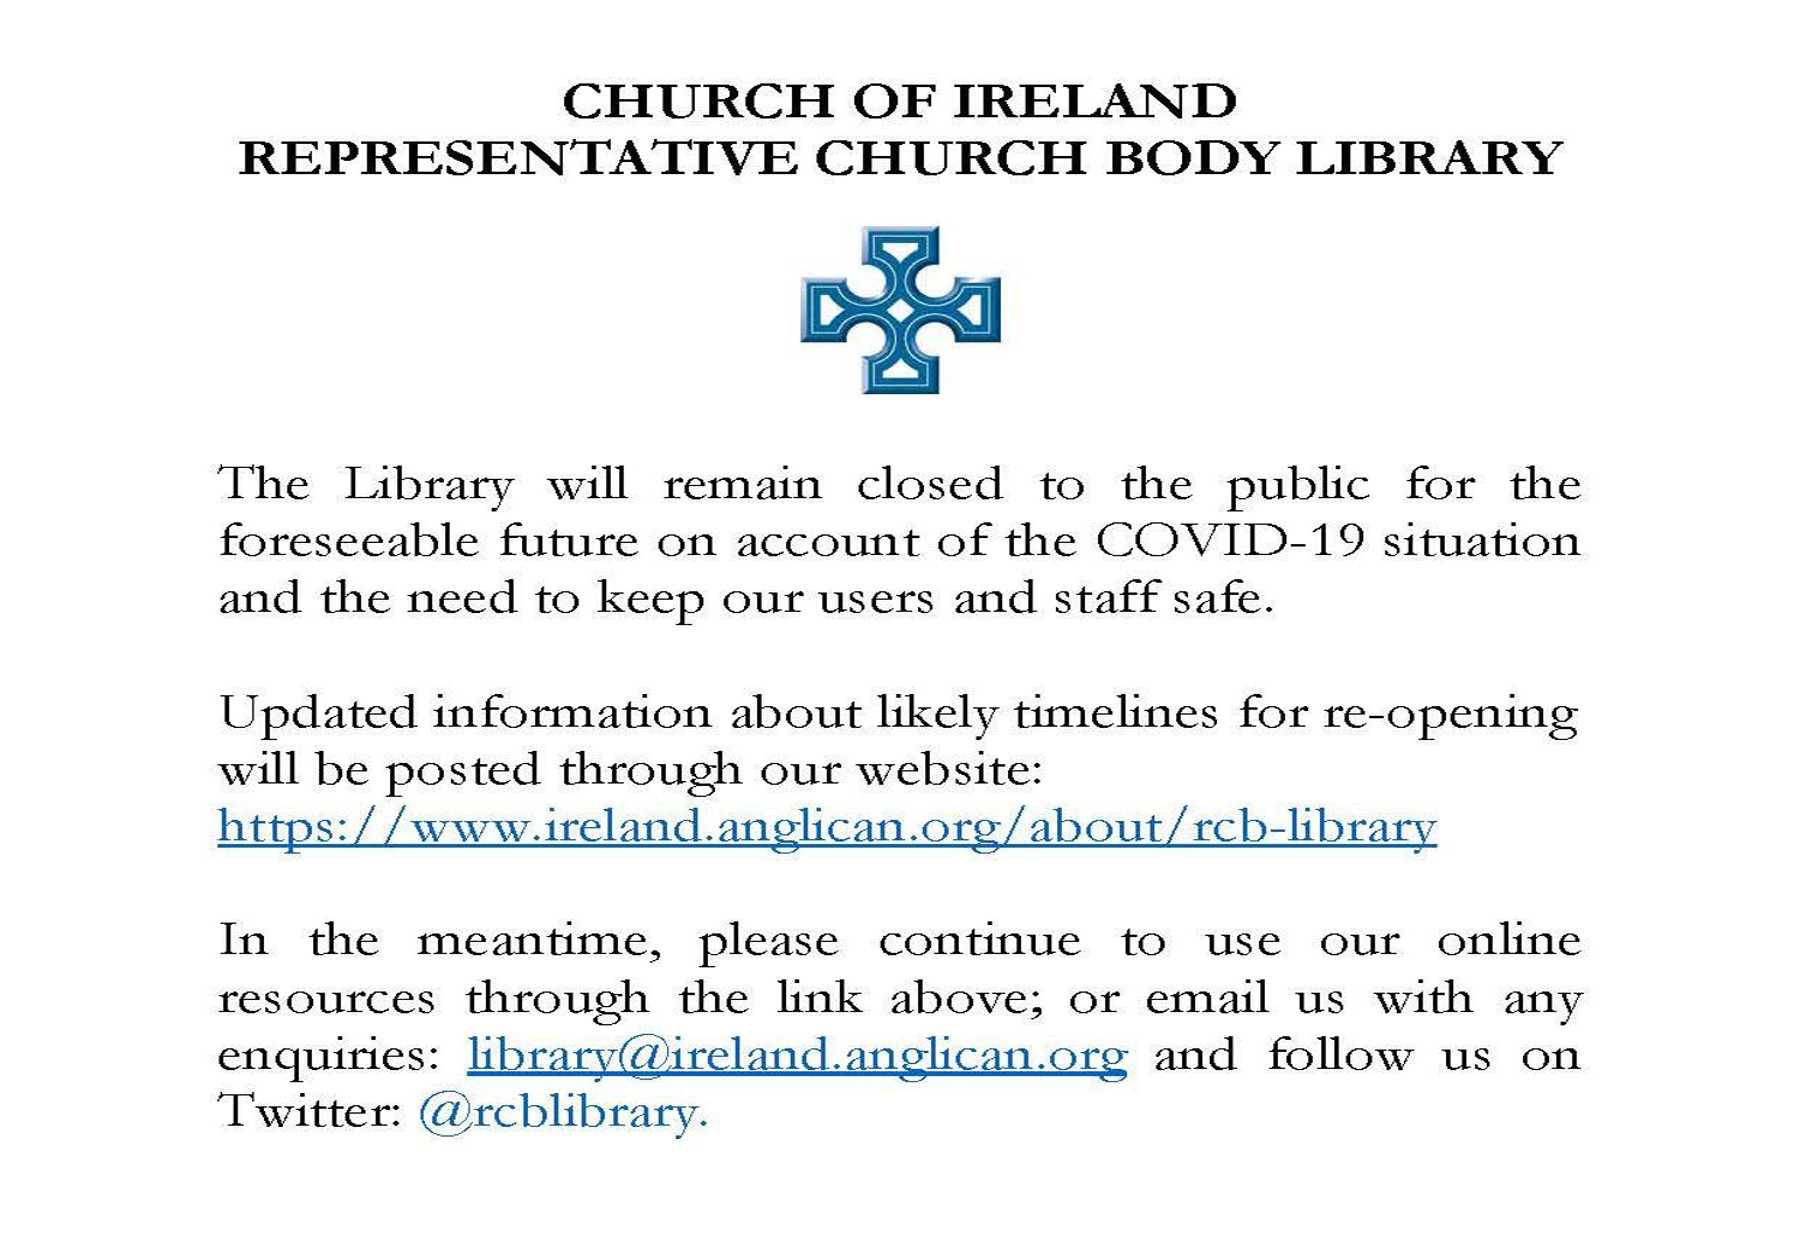 Church Of Ireland On Twitter Location Amp Contact Details Follow Rcblibrary The Library Is Located Opposite No 33 Braemor Park Postal Address Representative Church Body Library Braemor Park Churchtown Dublin 14 D14